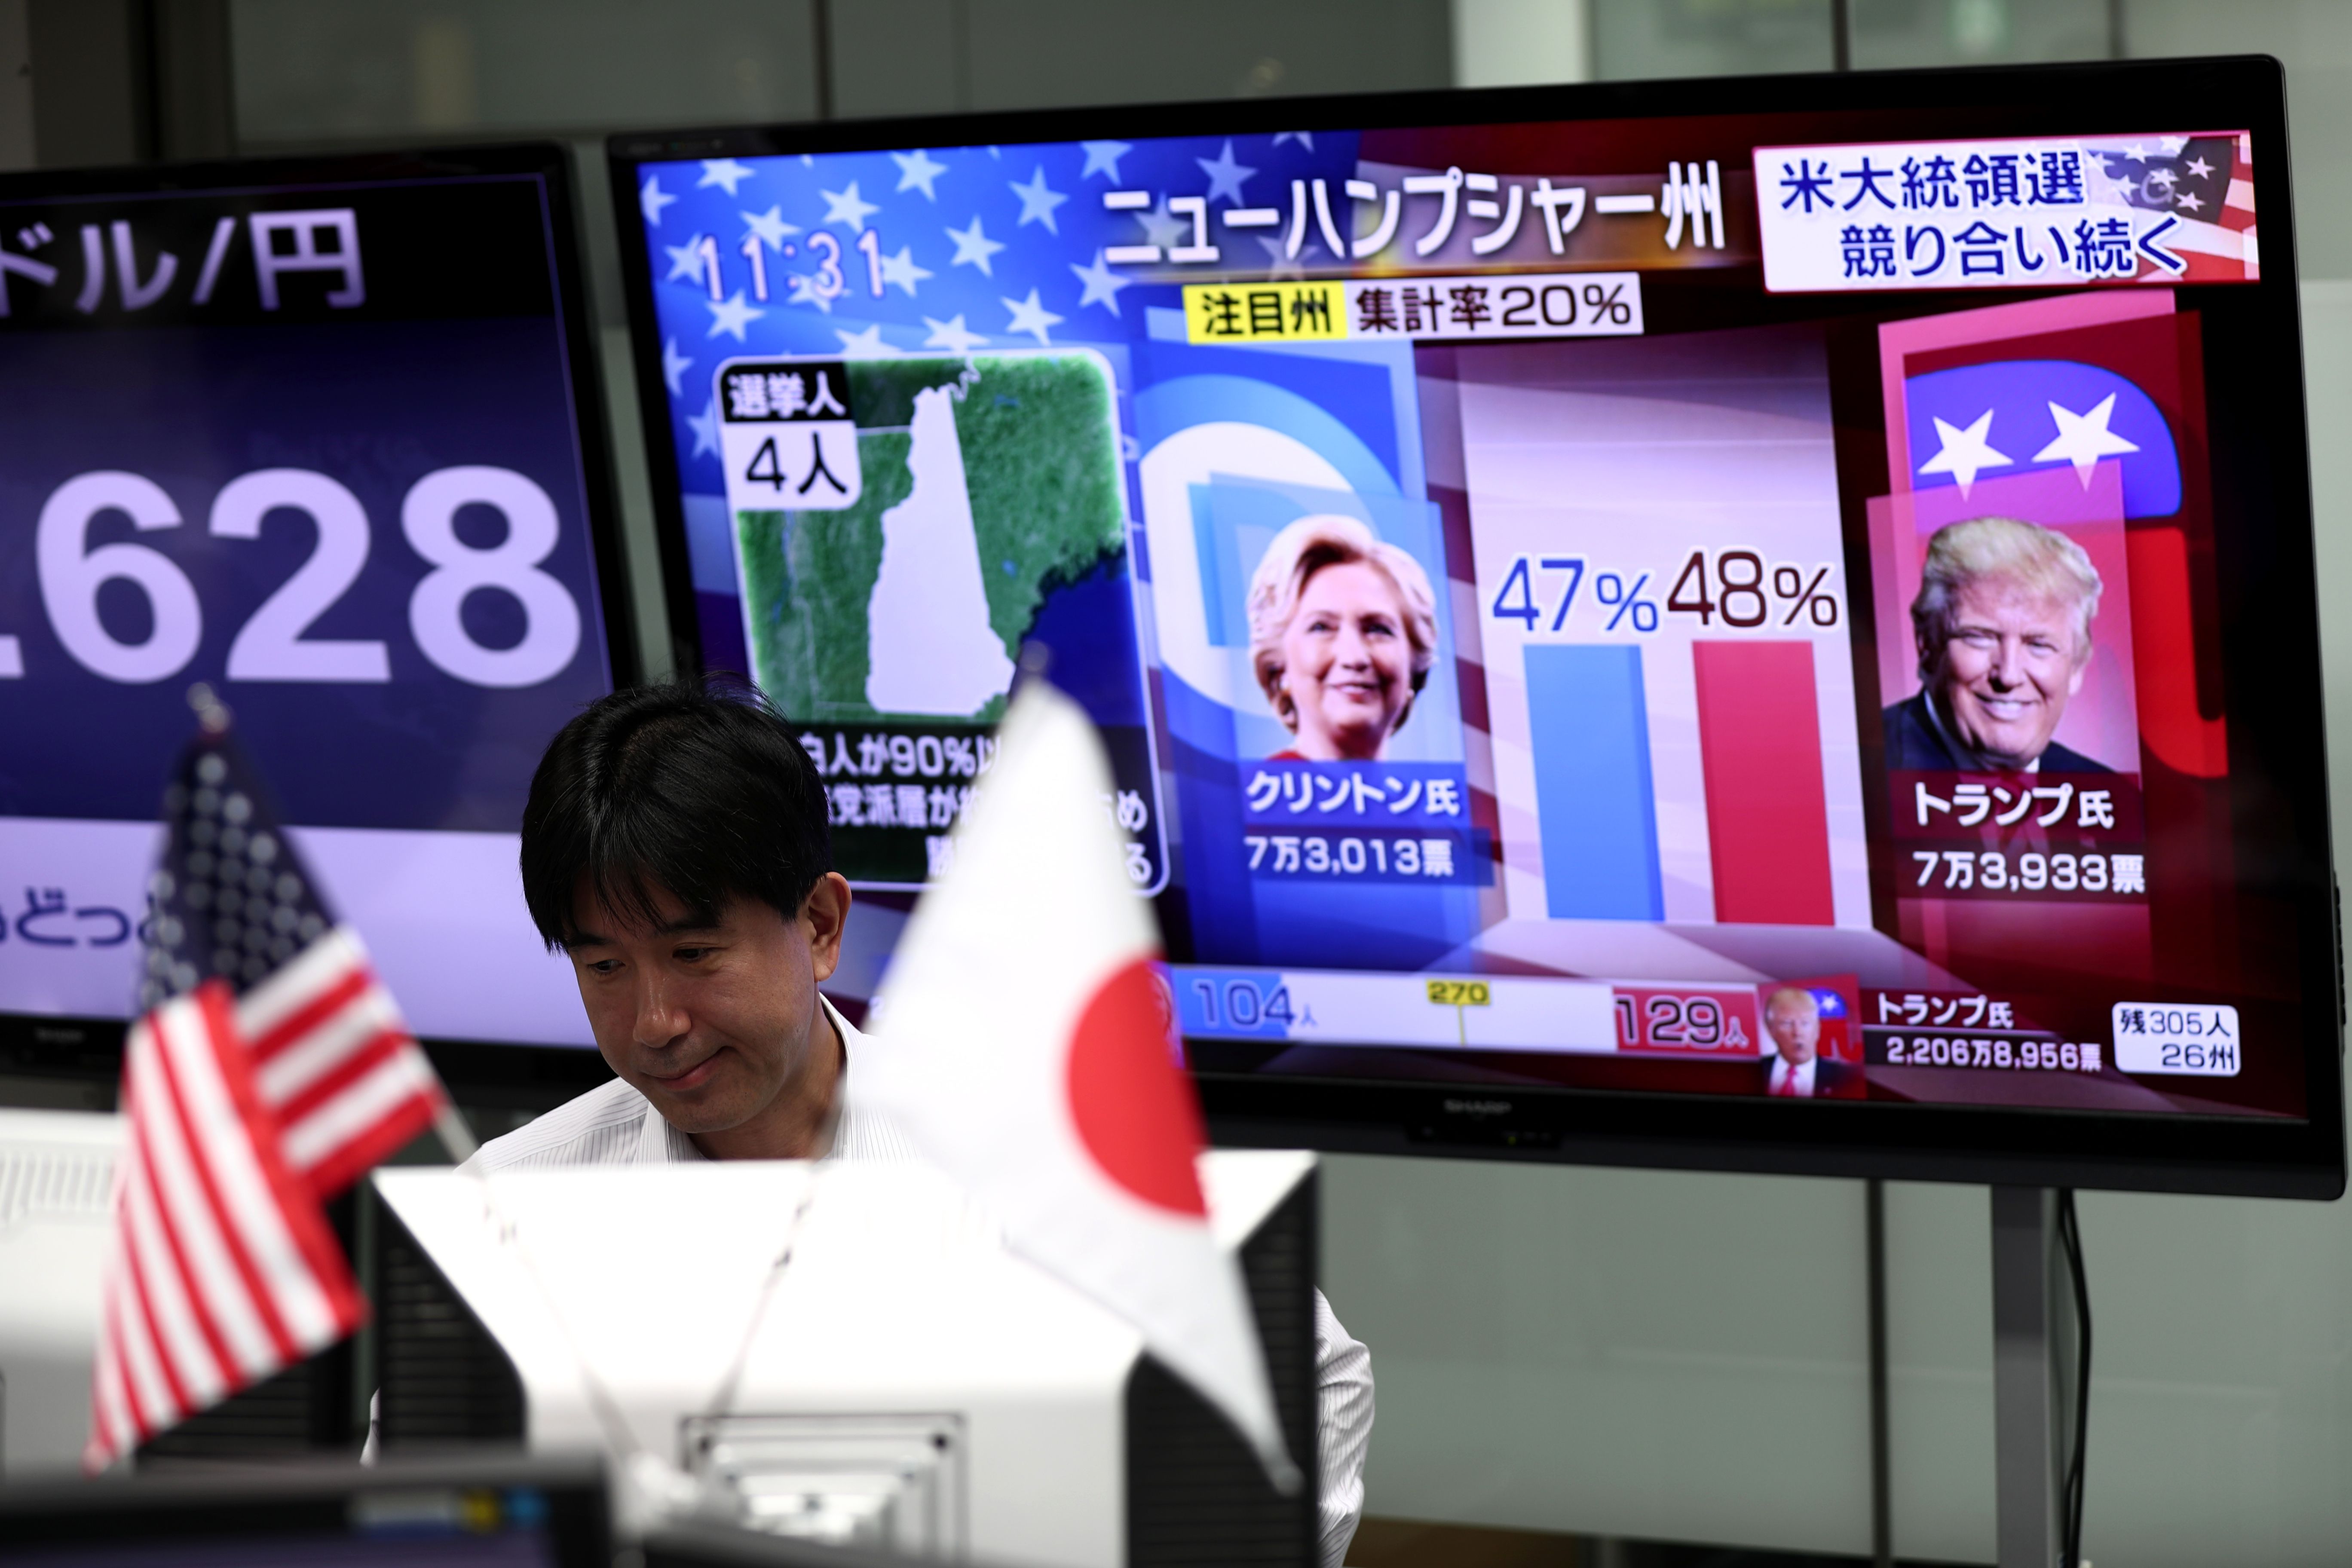 A currency trader observes progress in the U.S. presidential election as a TV channel displays portraits of contenders Hillary Clinton and Donald Trump, at a foreign exchange trading company in Tokyo on Wednesday. | AFP-JIJI